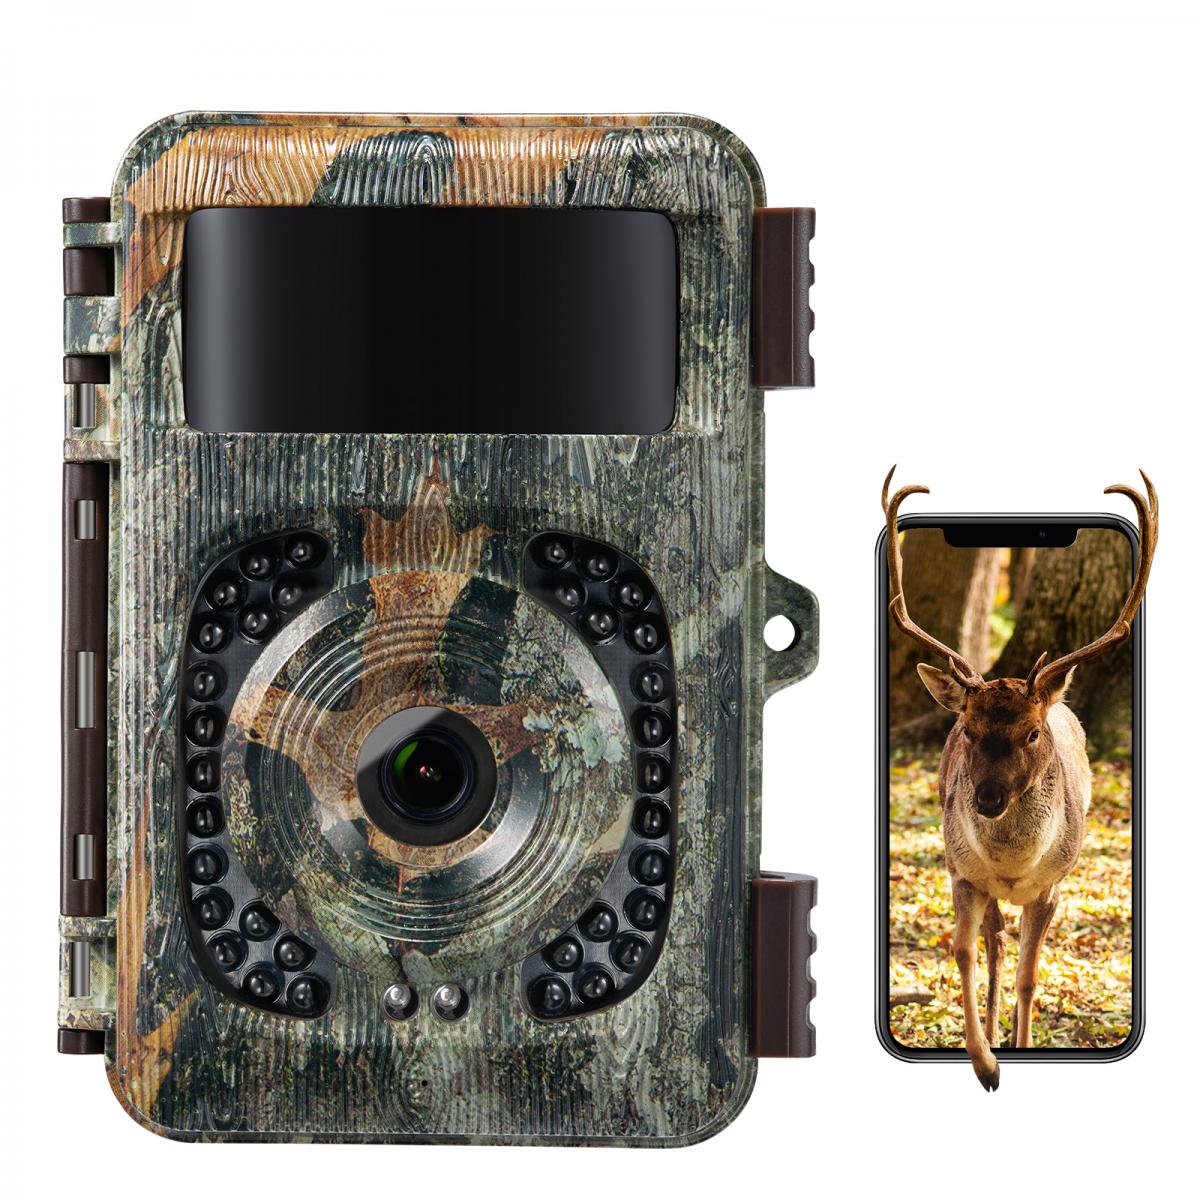 Product Image of K&F Concept 4K trail wildlife waterproof camera with 32MP photos, 4K Video, WiFi & Bluetooth